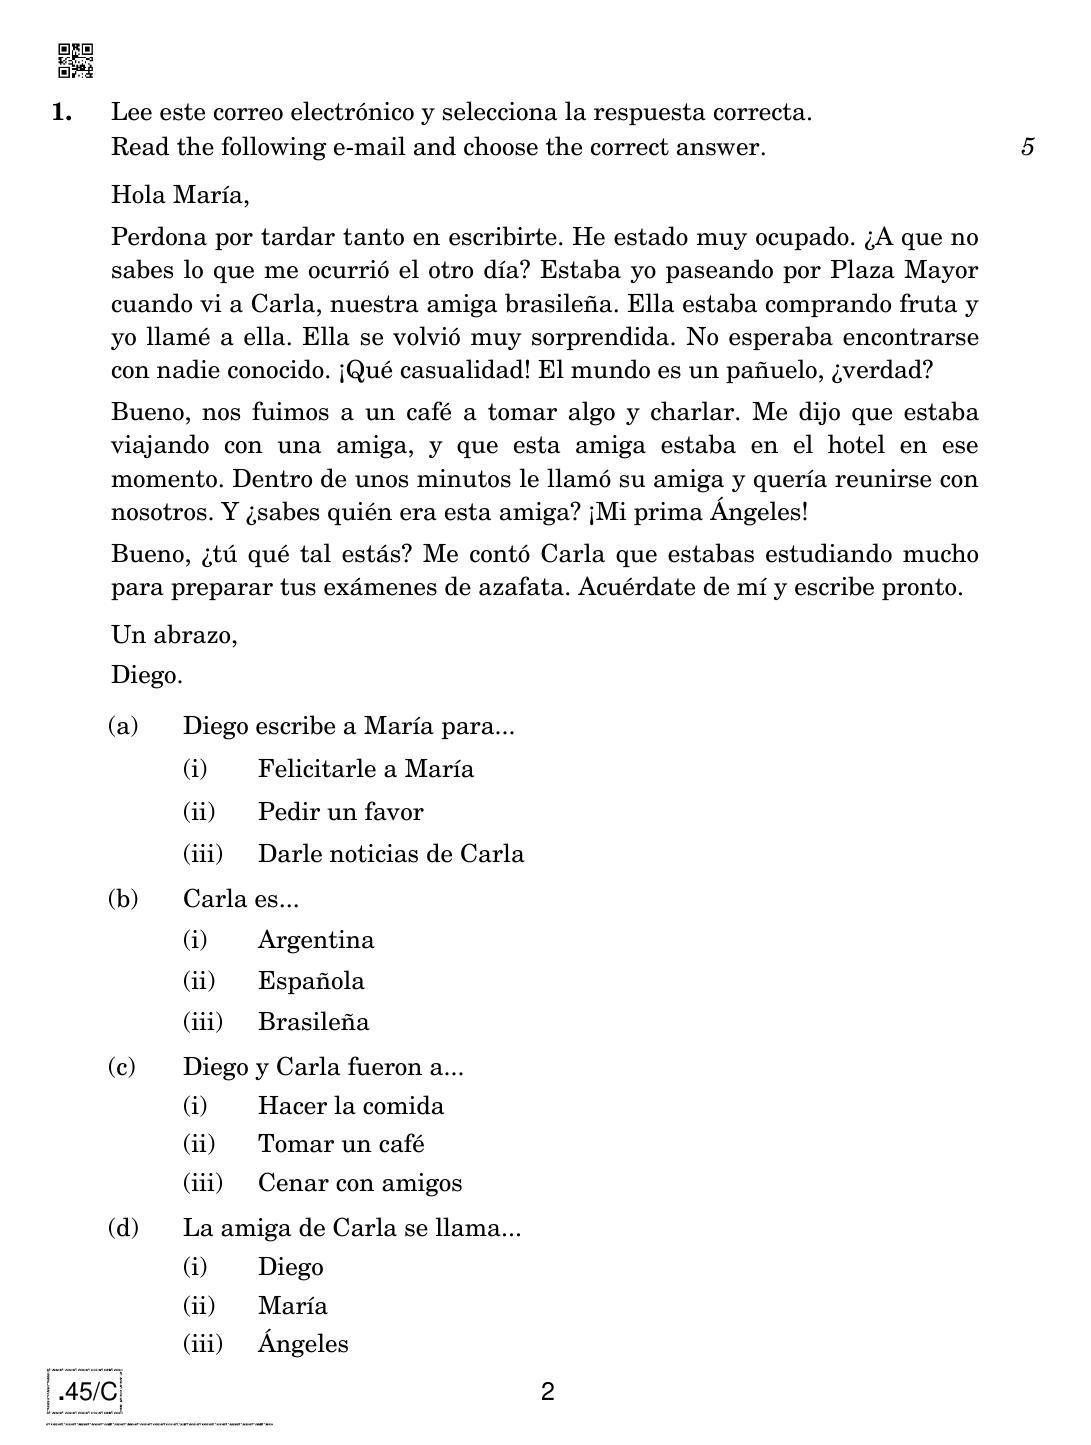 CBSE Class 10 Spanish 2020 Compartment Question Paper - Page 2